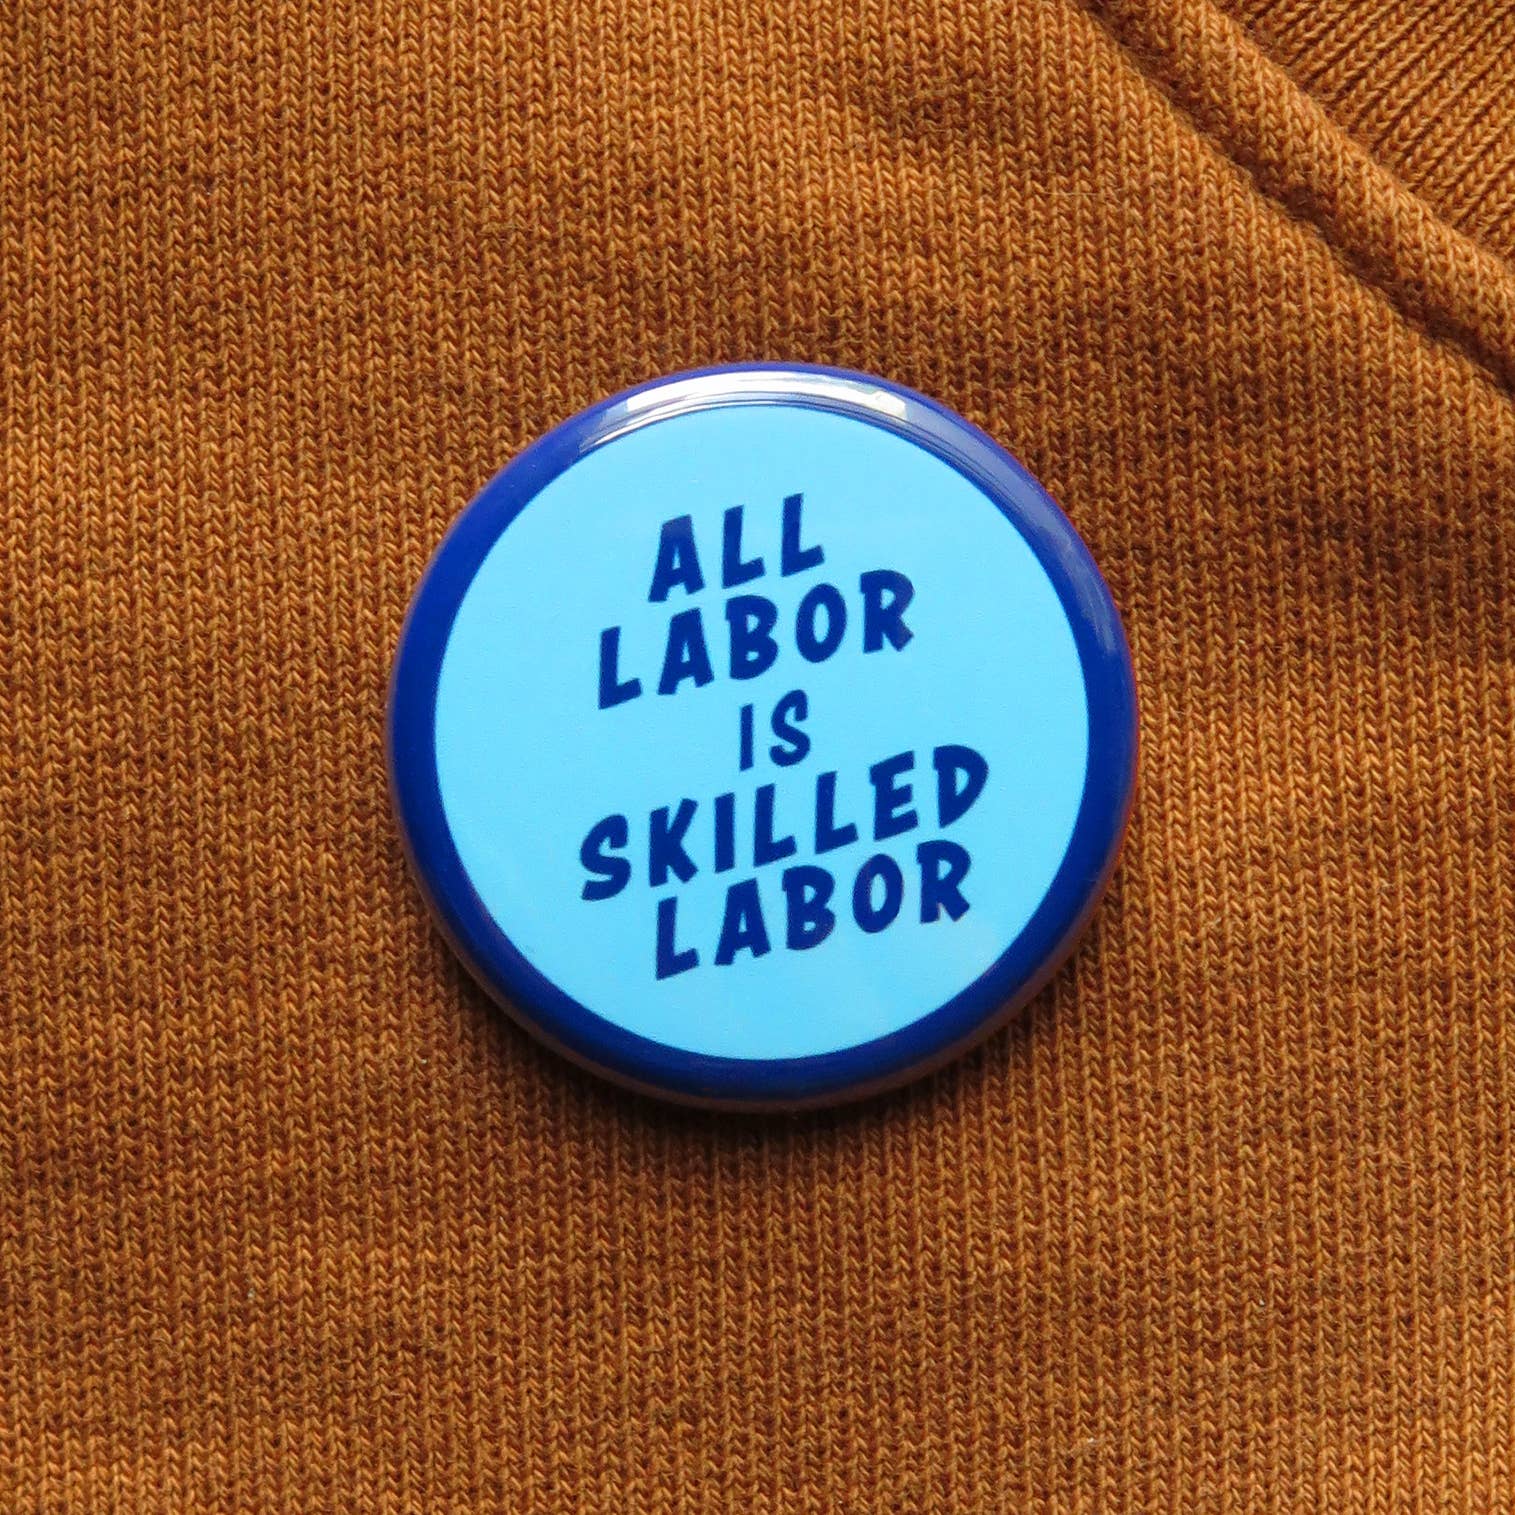 ALL LABOR IS SKILLED LABOR political pinback button